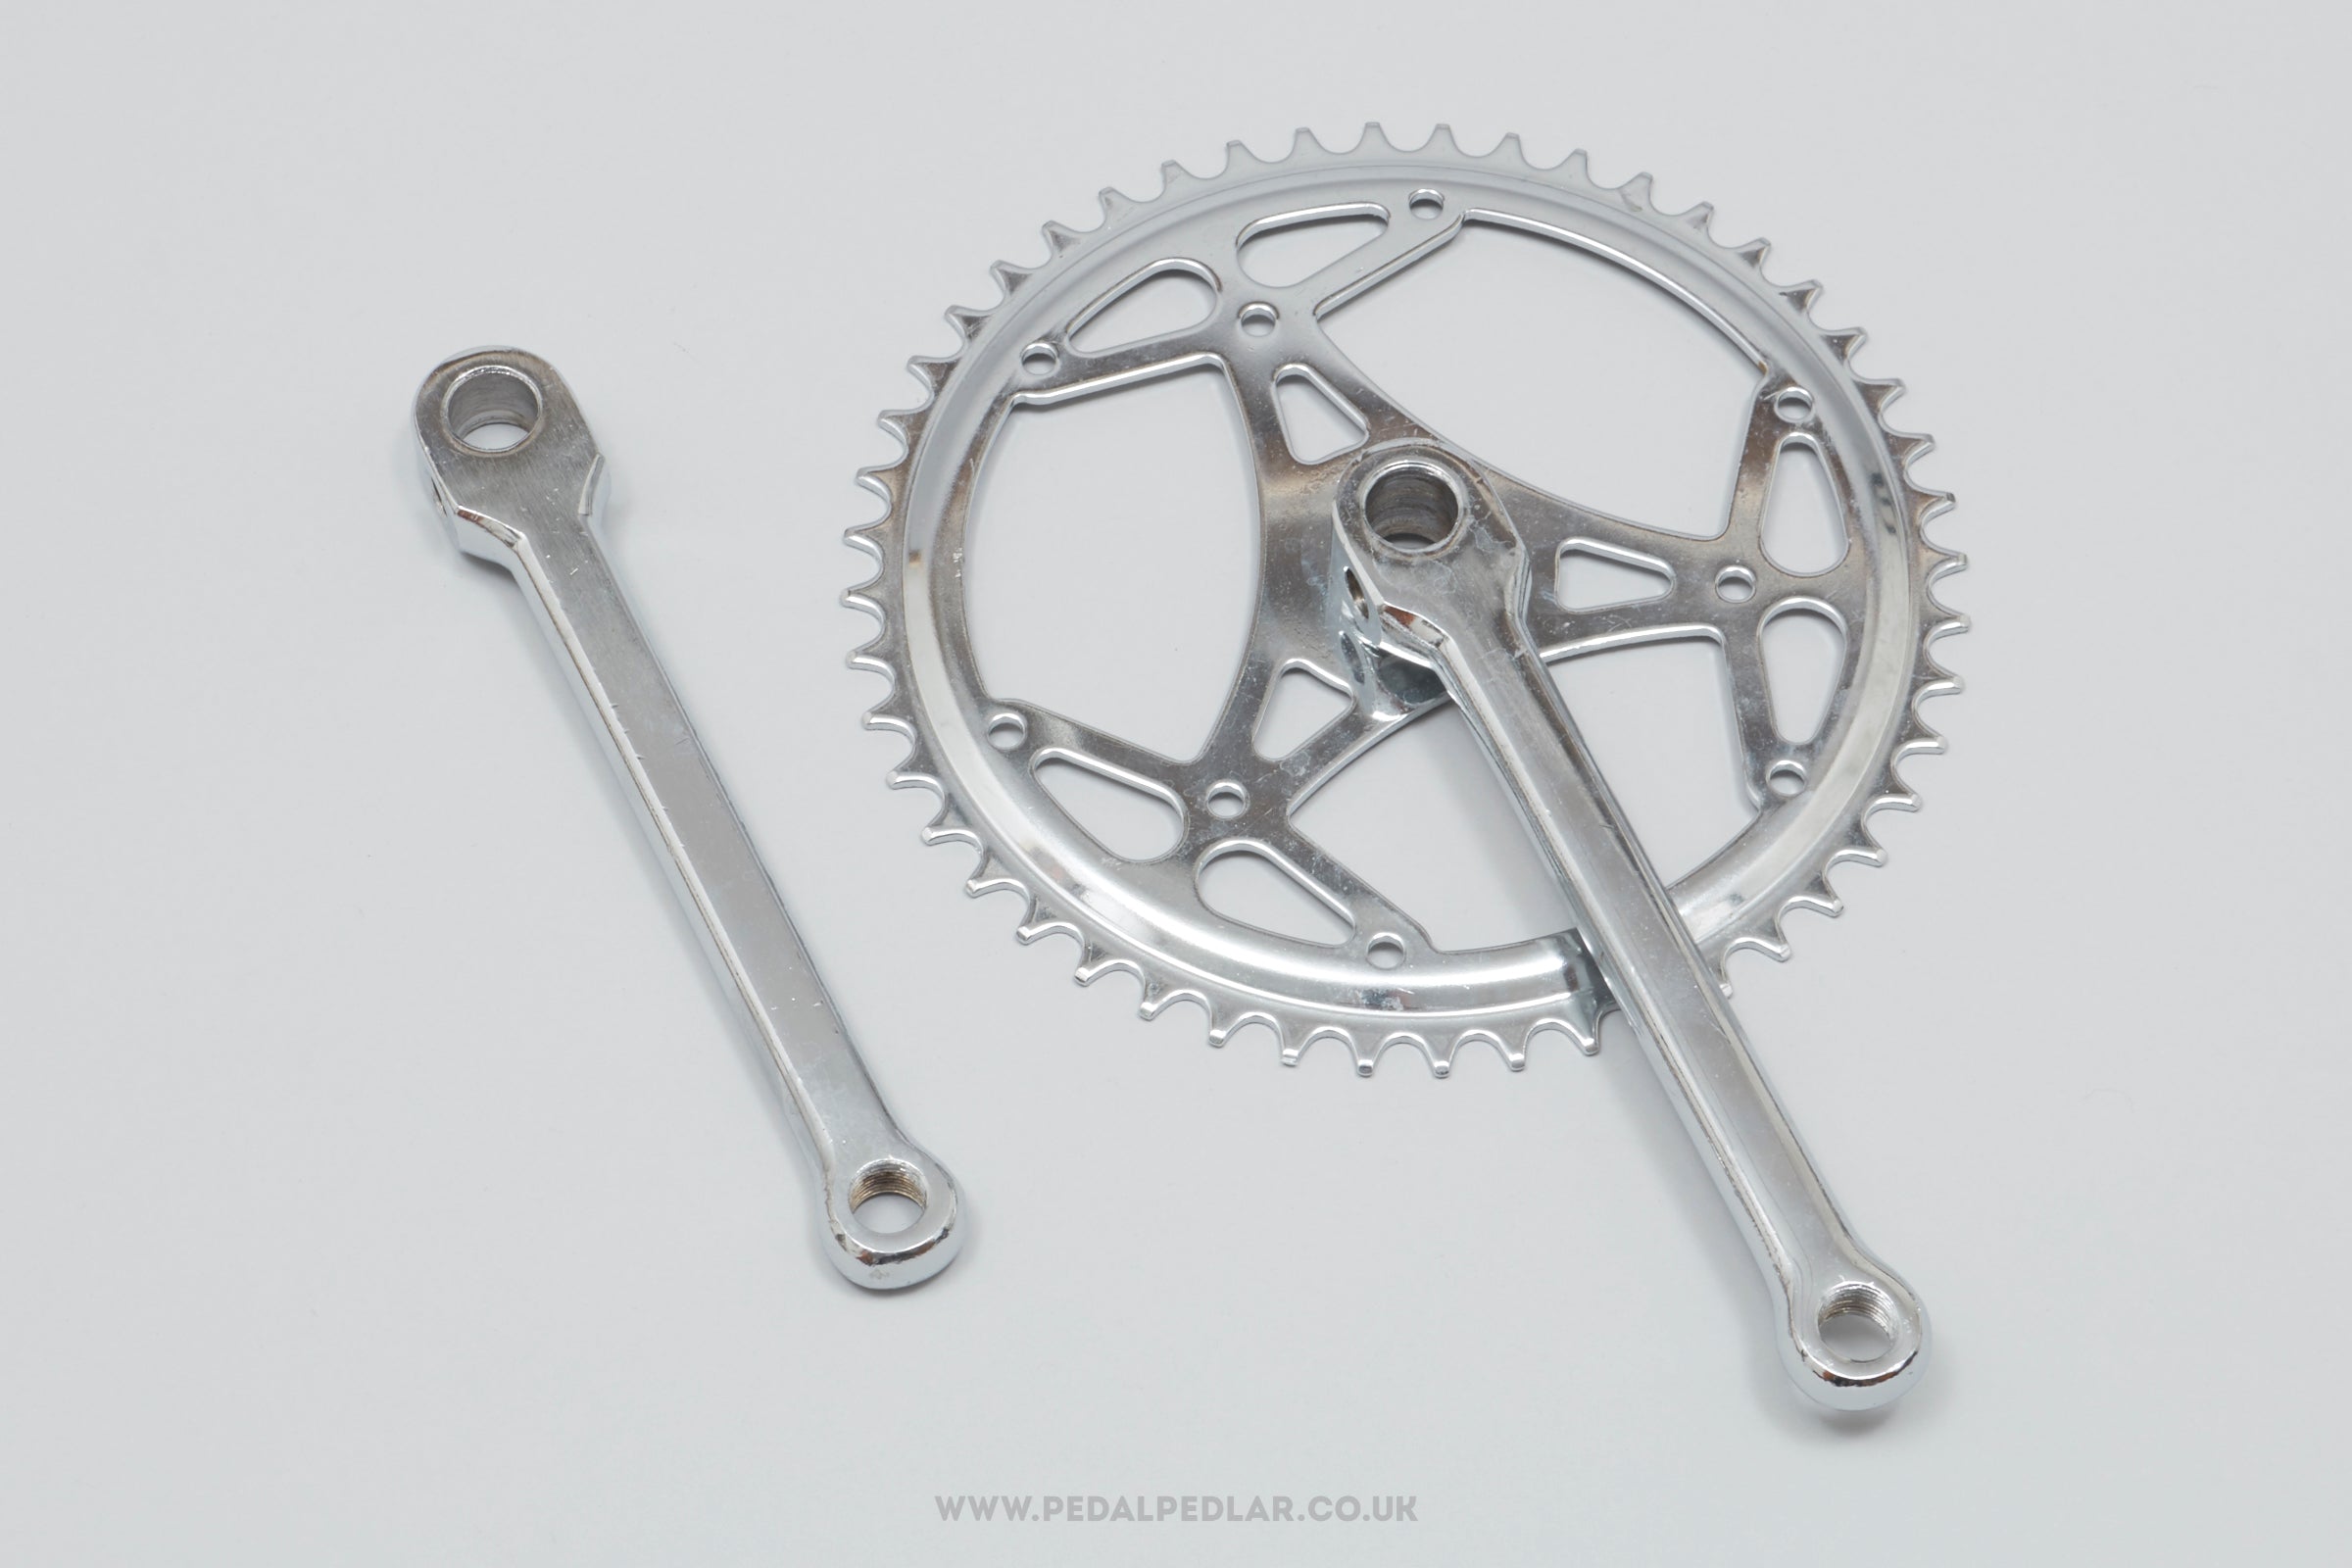 Thun NOS Vintage Single 48T Cottered Town/City Crank/Chainset - Pedal Pedlar - Buy New Old Stock Bike Parts